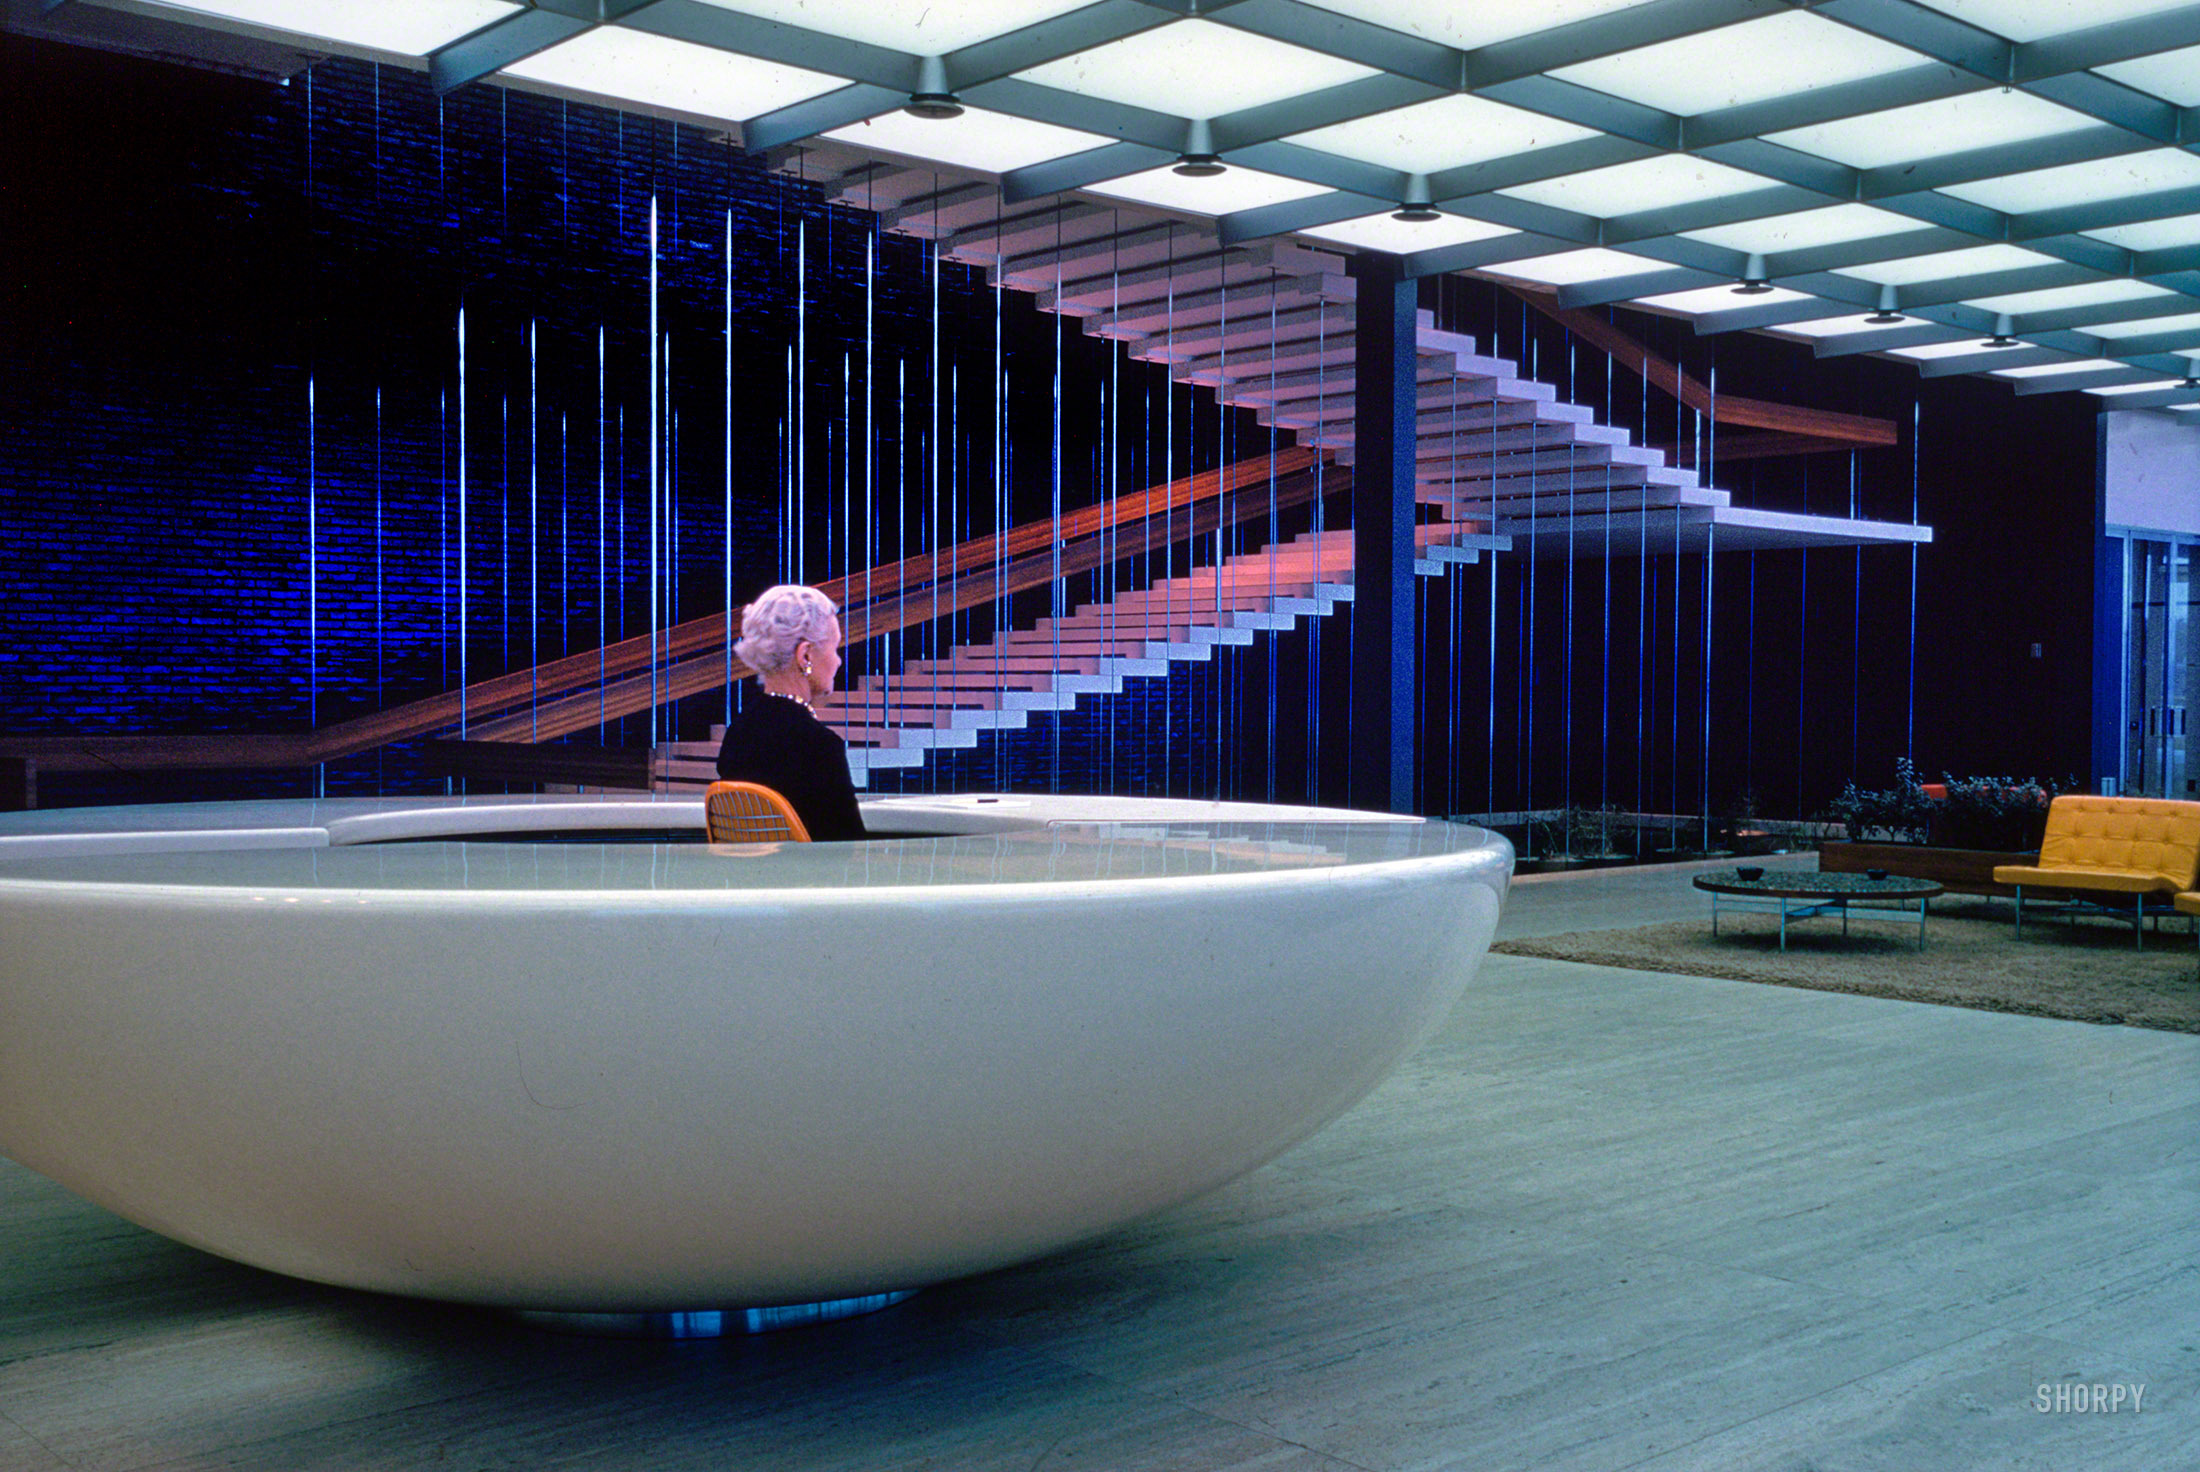 1956. "General Motors Technical Center, Warren, Michigan. Design Center interior with stair in background. Eero Saarinen, architect." Our second look at the reception disk and its pilot. Kodachrome by Balthazar Korab. View full size.